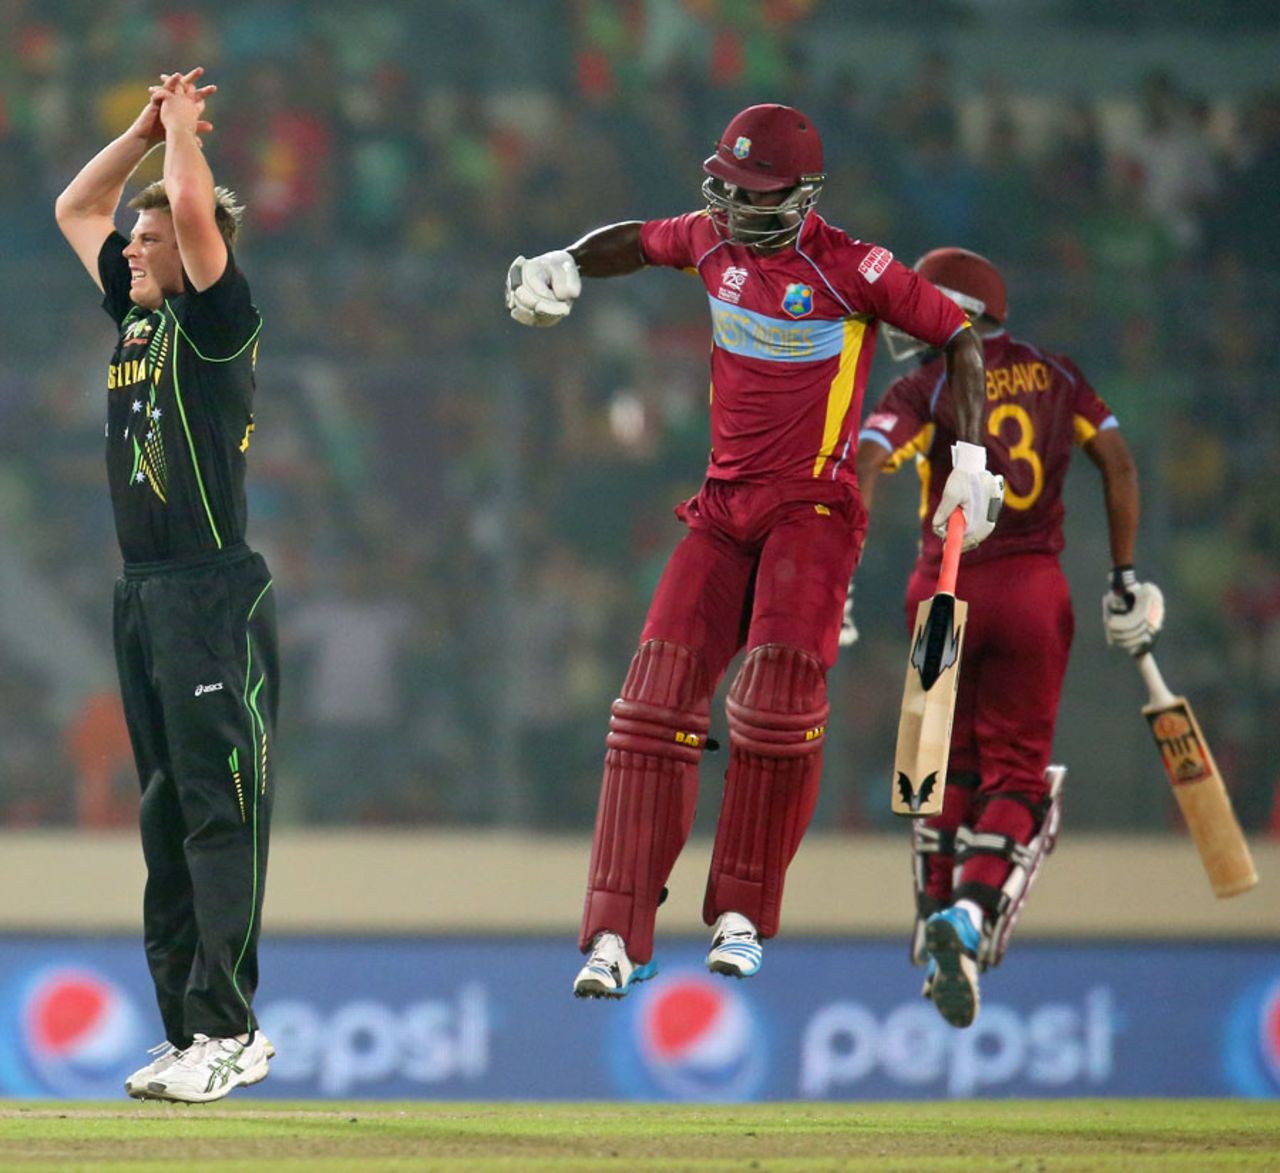 James Faulkner reacts after Darren Sammy finishes the match with a six, Australia v West Indies, World T20, Group 2, Mirpur, March 28, 2014